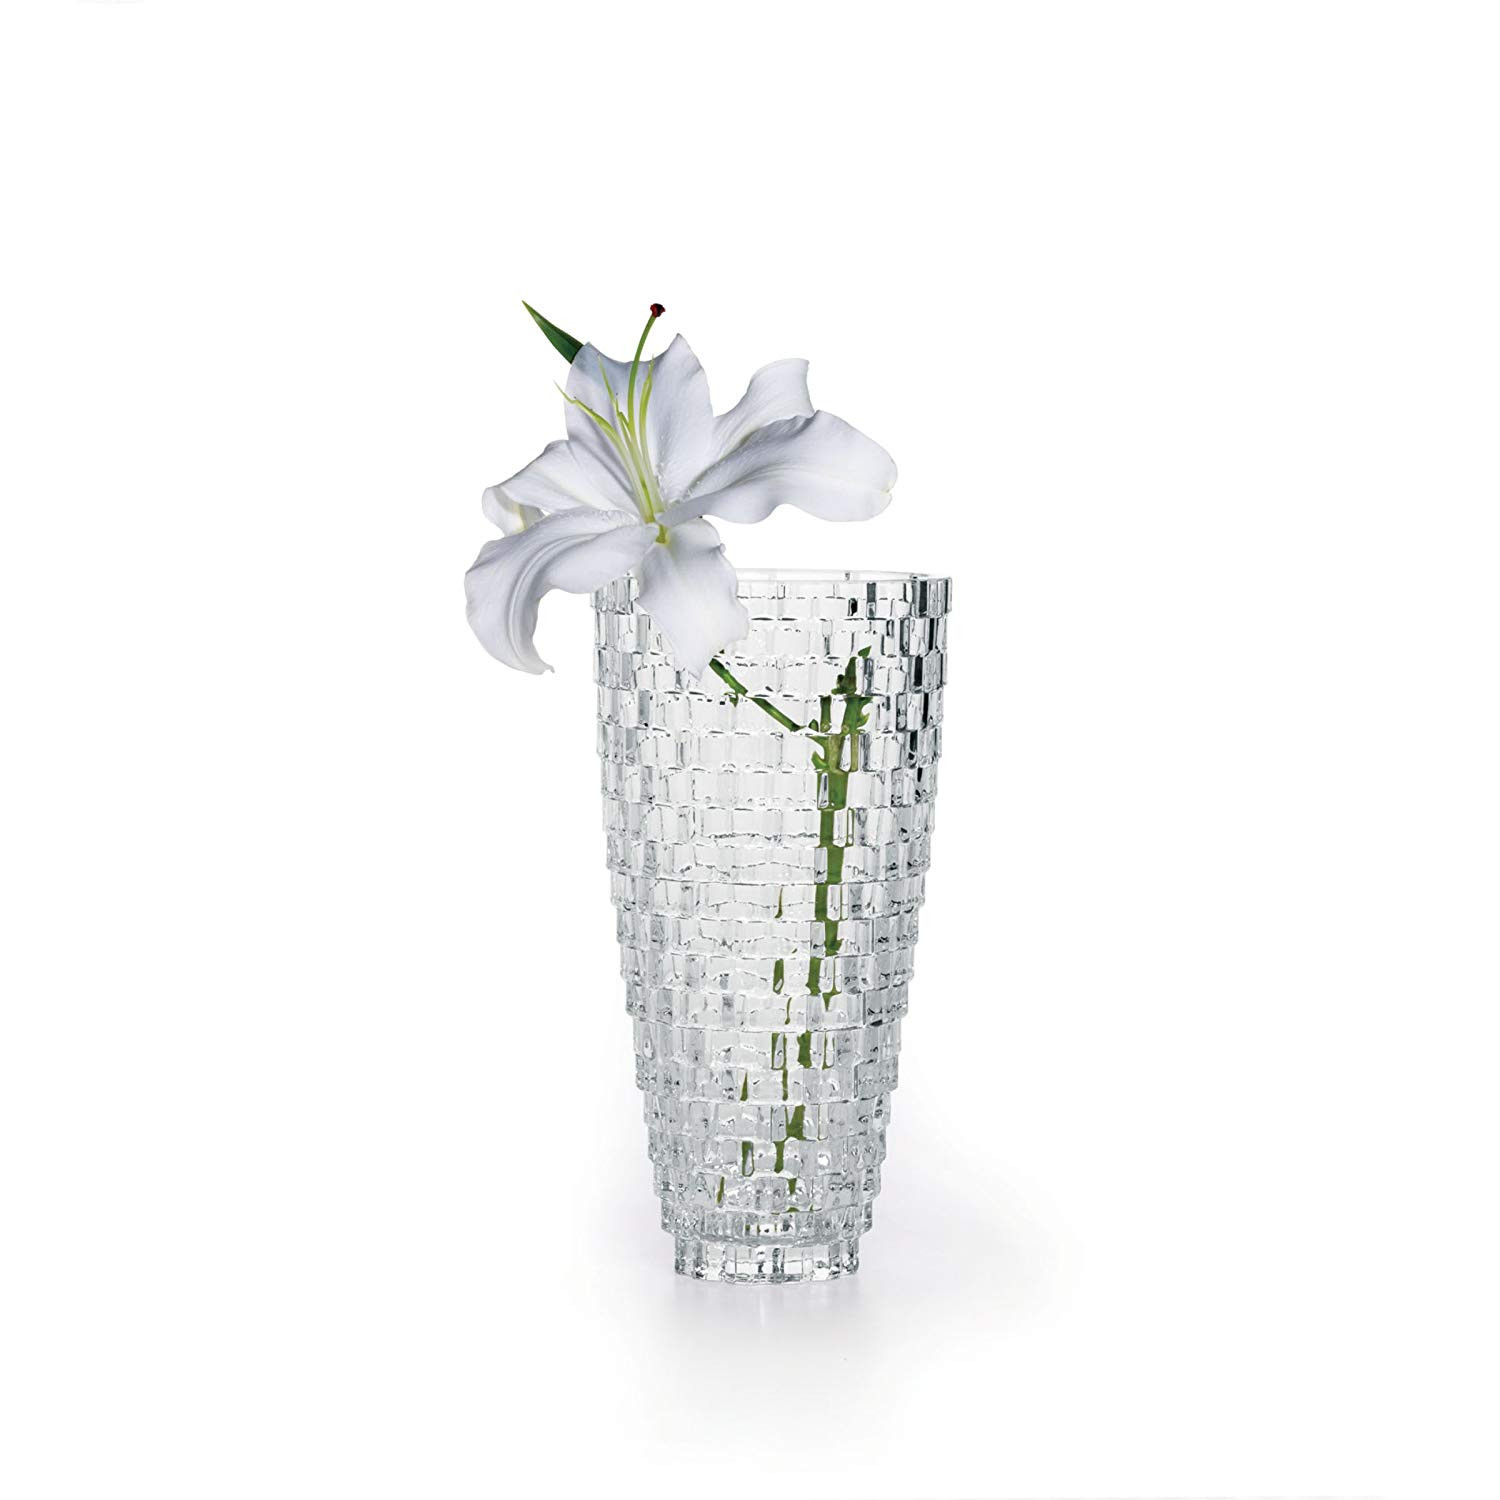 30 Great Marquis by Waterford Rainfall Vase 11 2024 free download marquis by waterford rainfall vase 11 of amazon com mikasa palazzo vase crystal 9 home kitchen intended for 71omlzr32fl sl1500